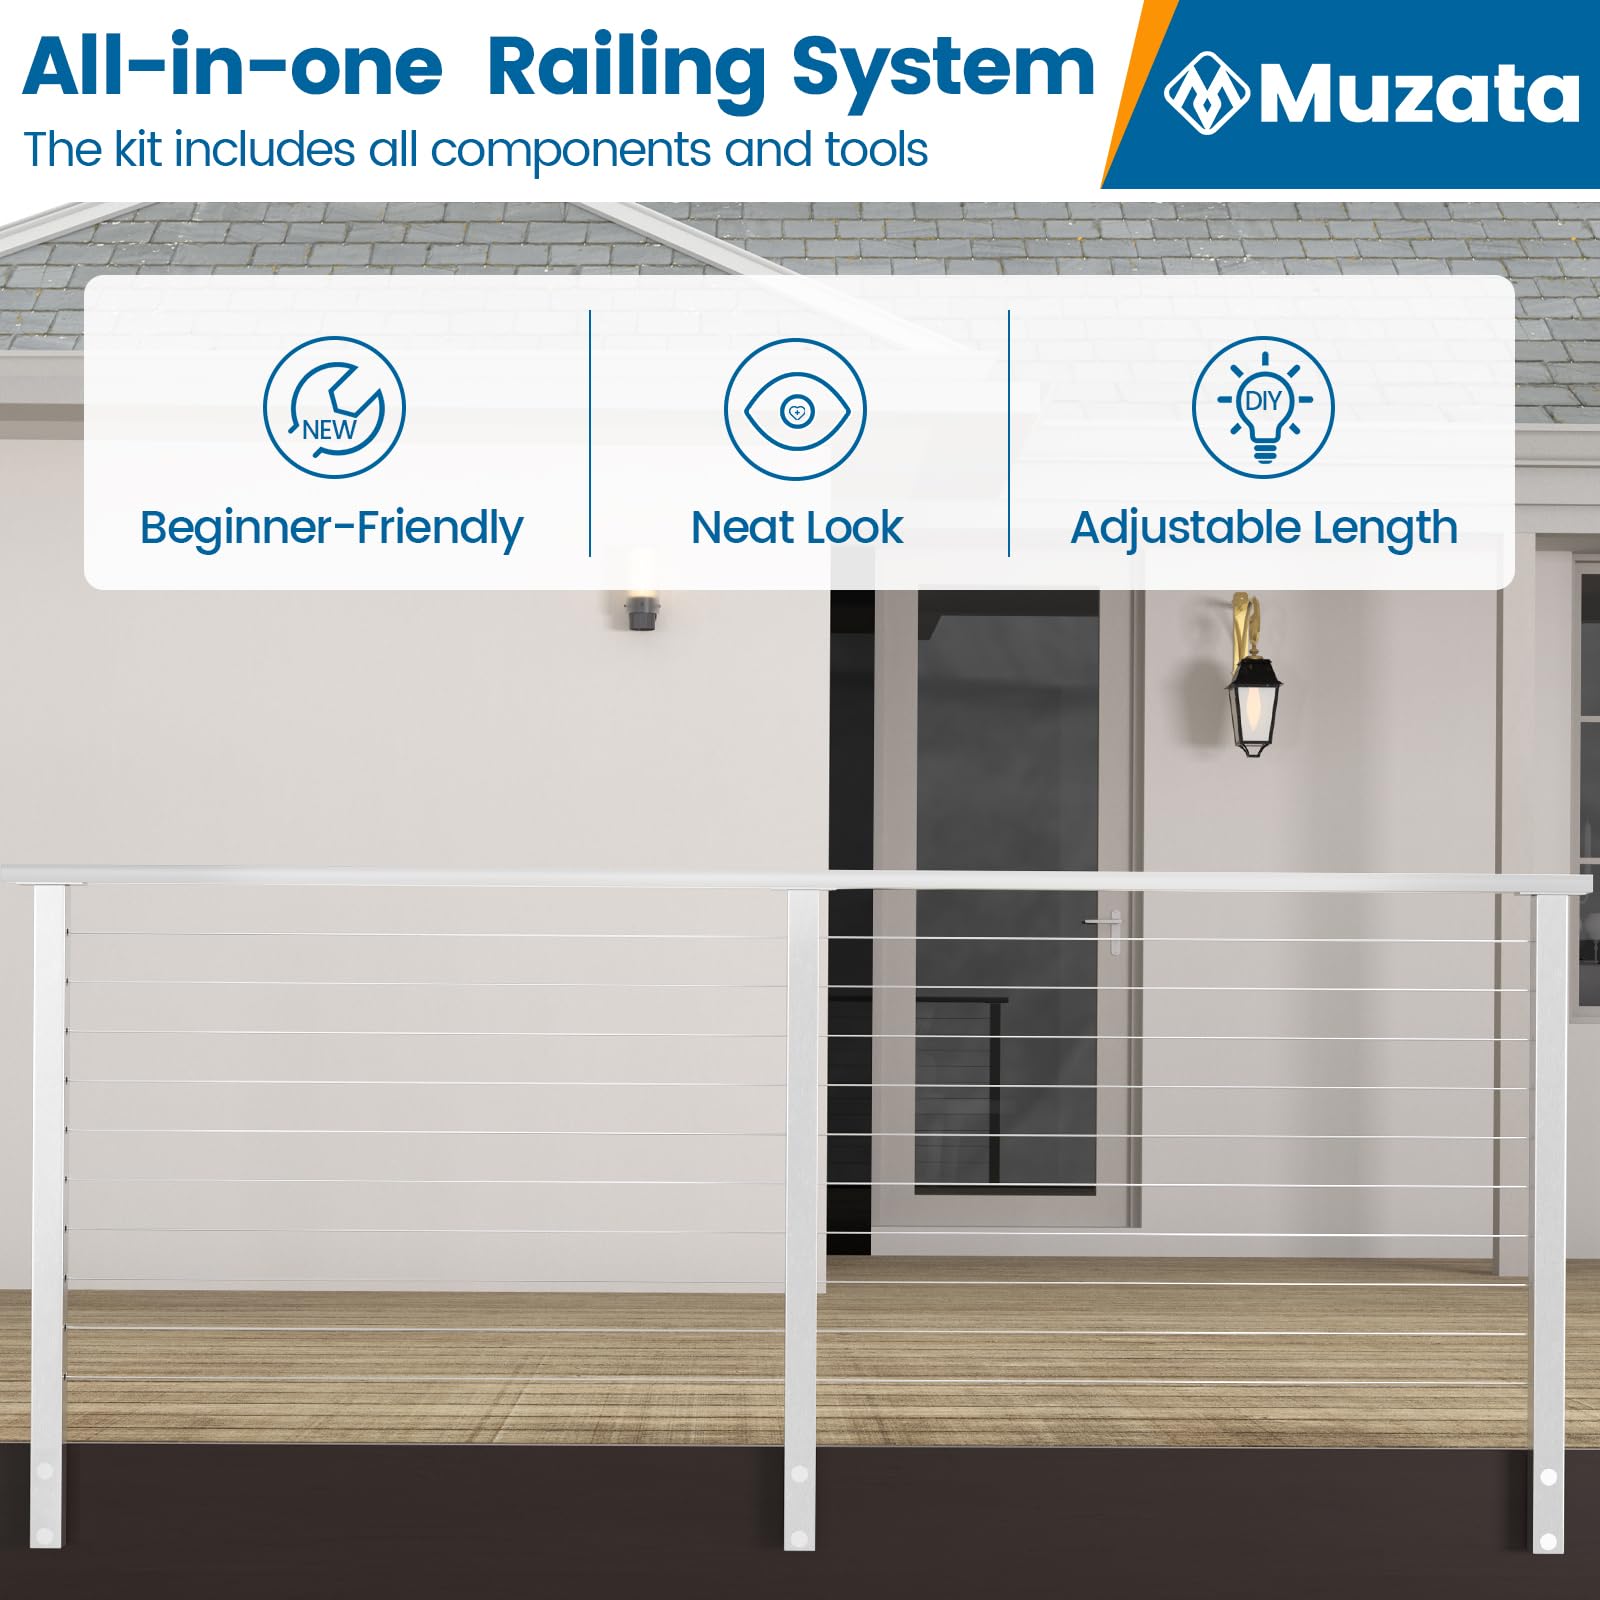 Muzata 6.5ft，13ft，20ft Complete Set Cable Railing System, One Stop Service All-in-One DIY Kit Fit